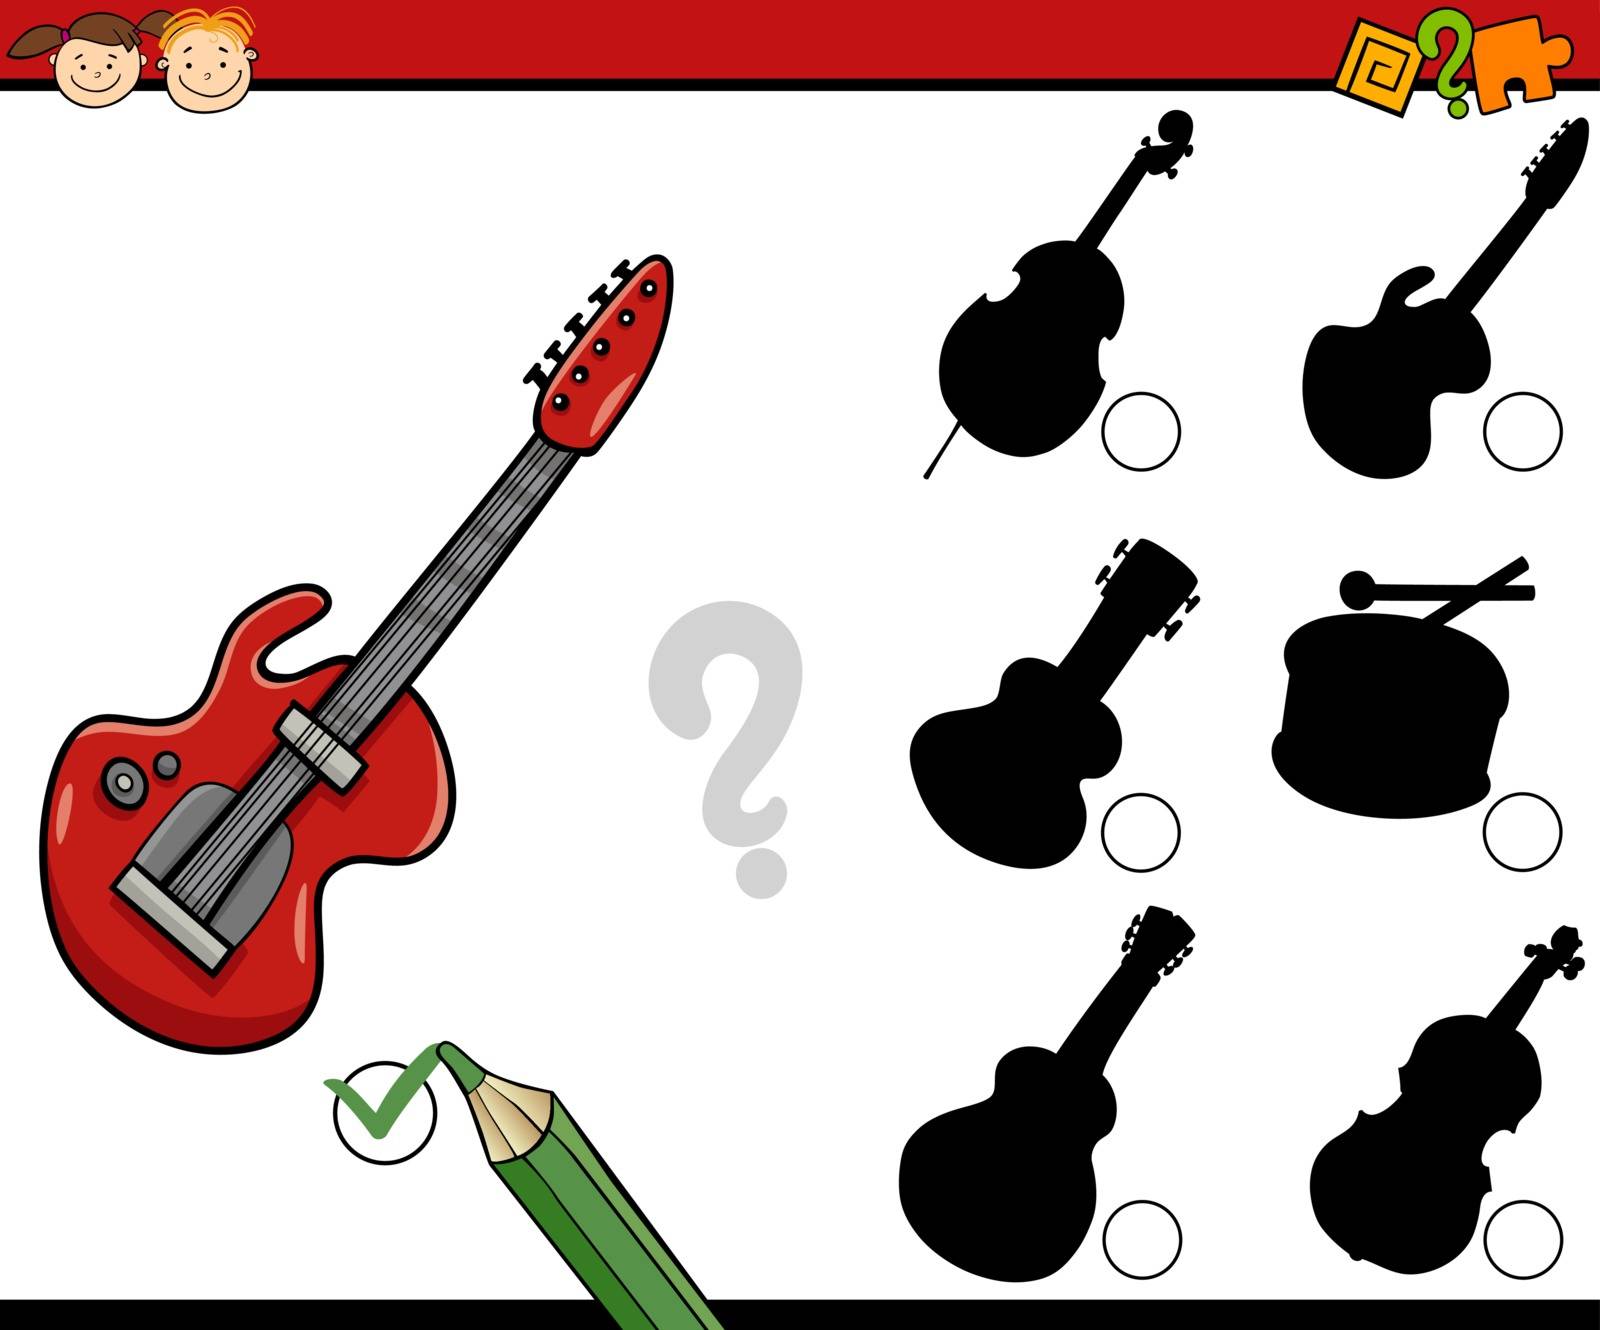 Cartoon Illustration of Education Shadow Matching Task for Preschool Children with Musical Instruments